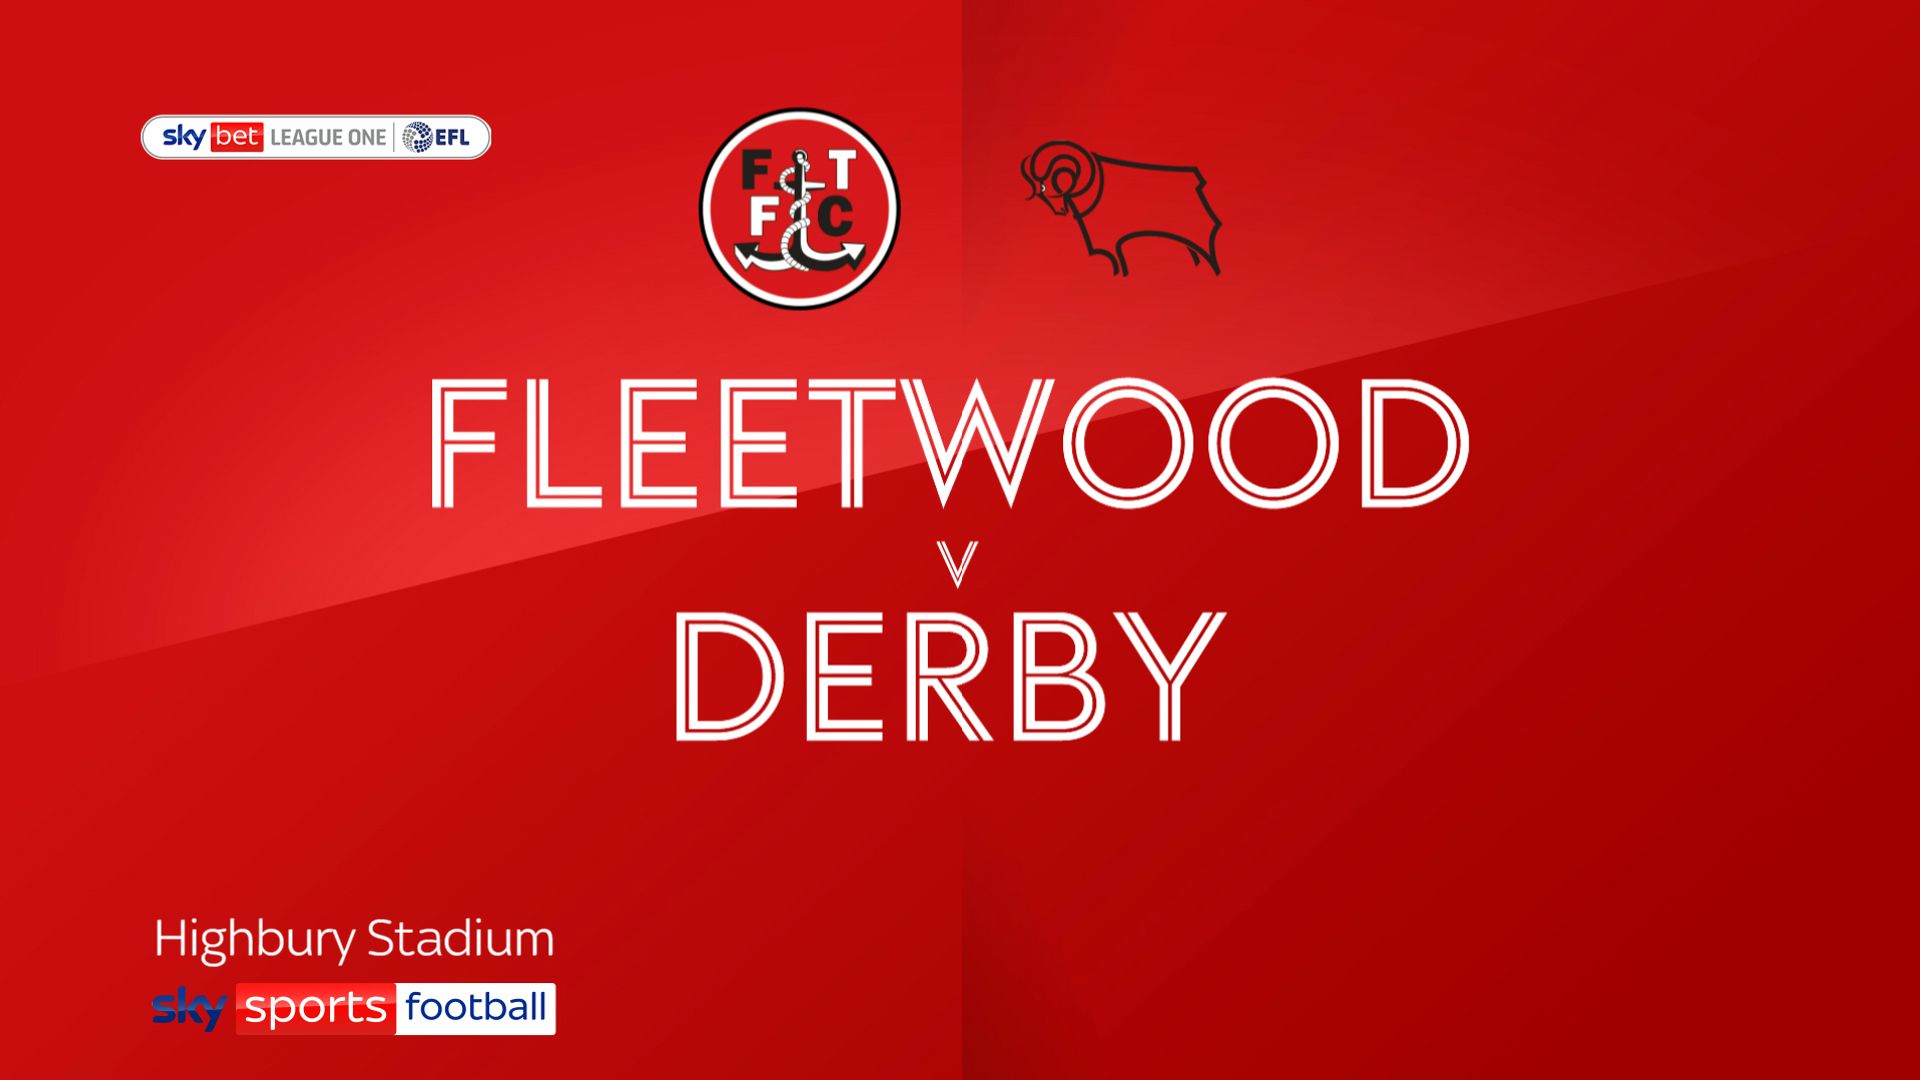 Fleetwood and Derby settle for a draw at Highbury